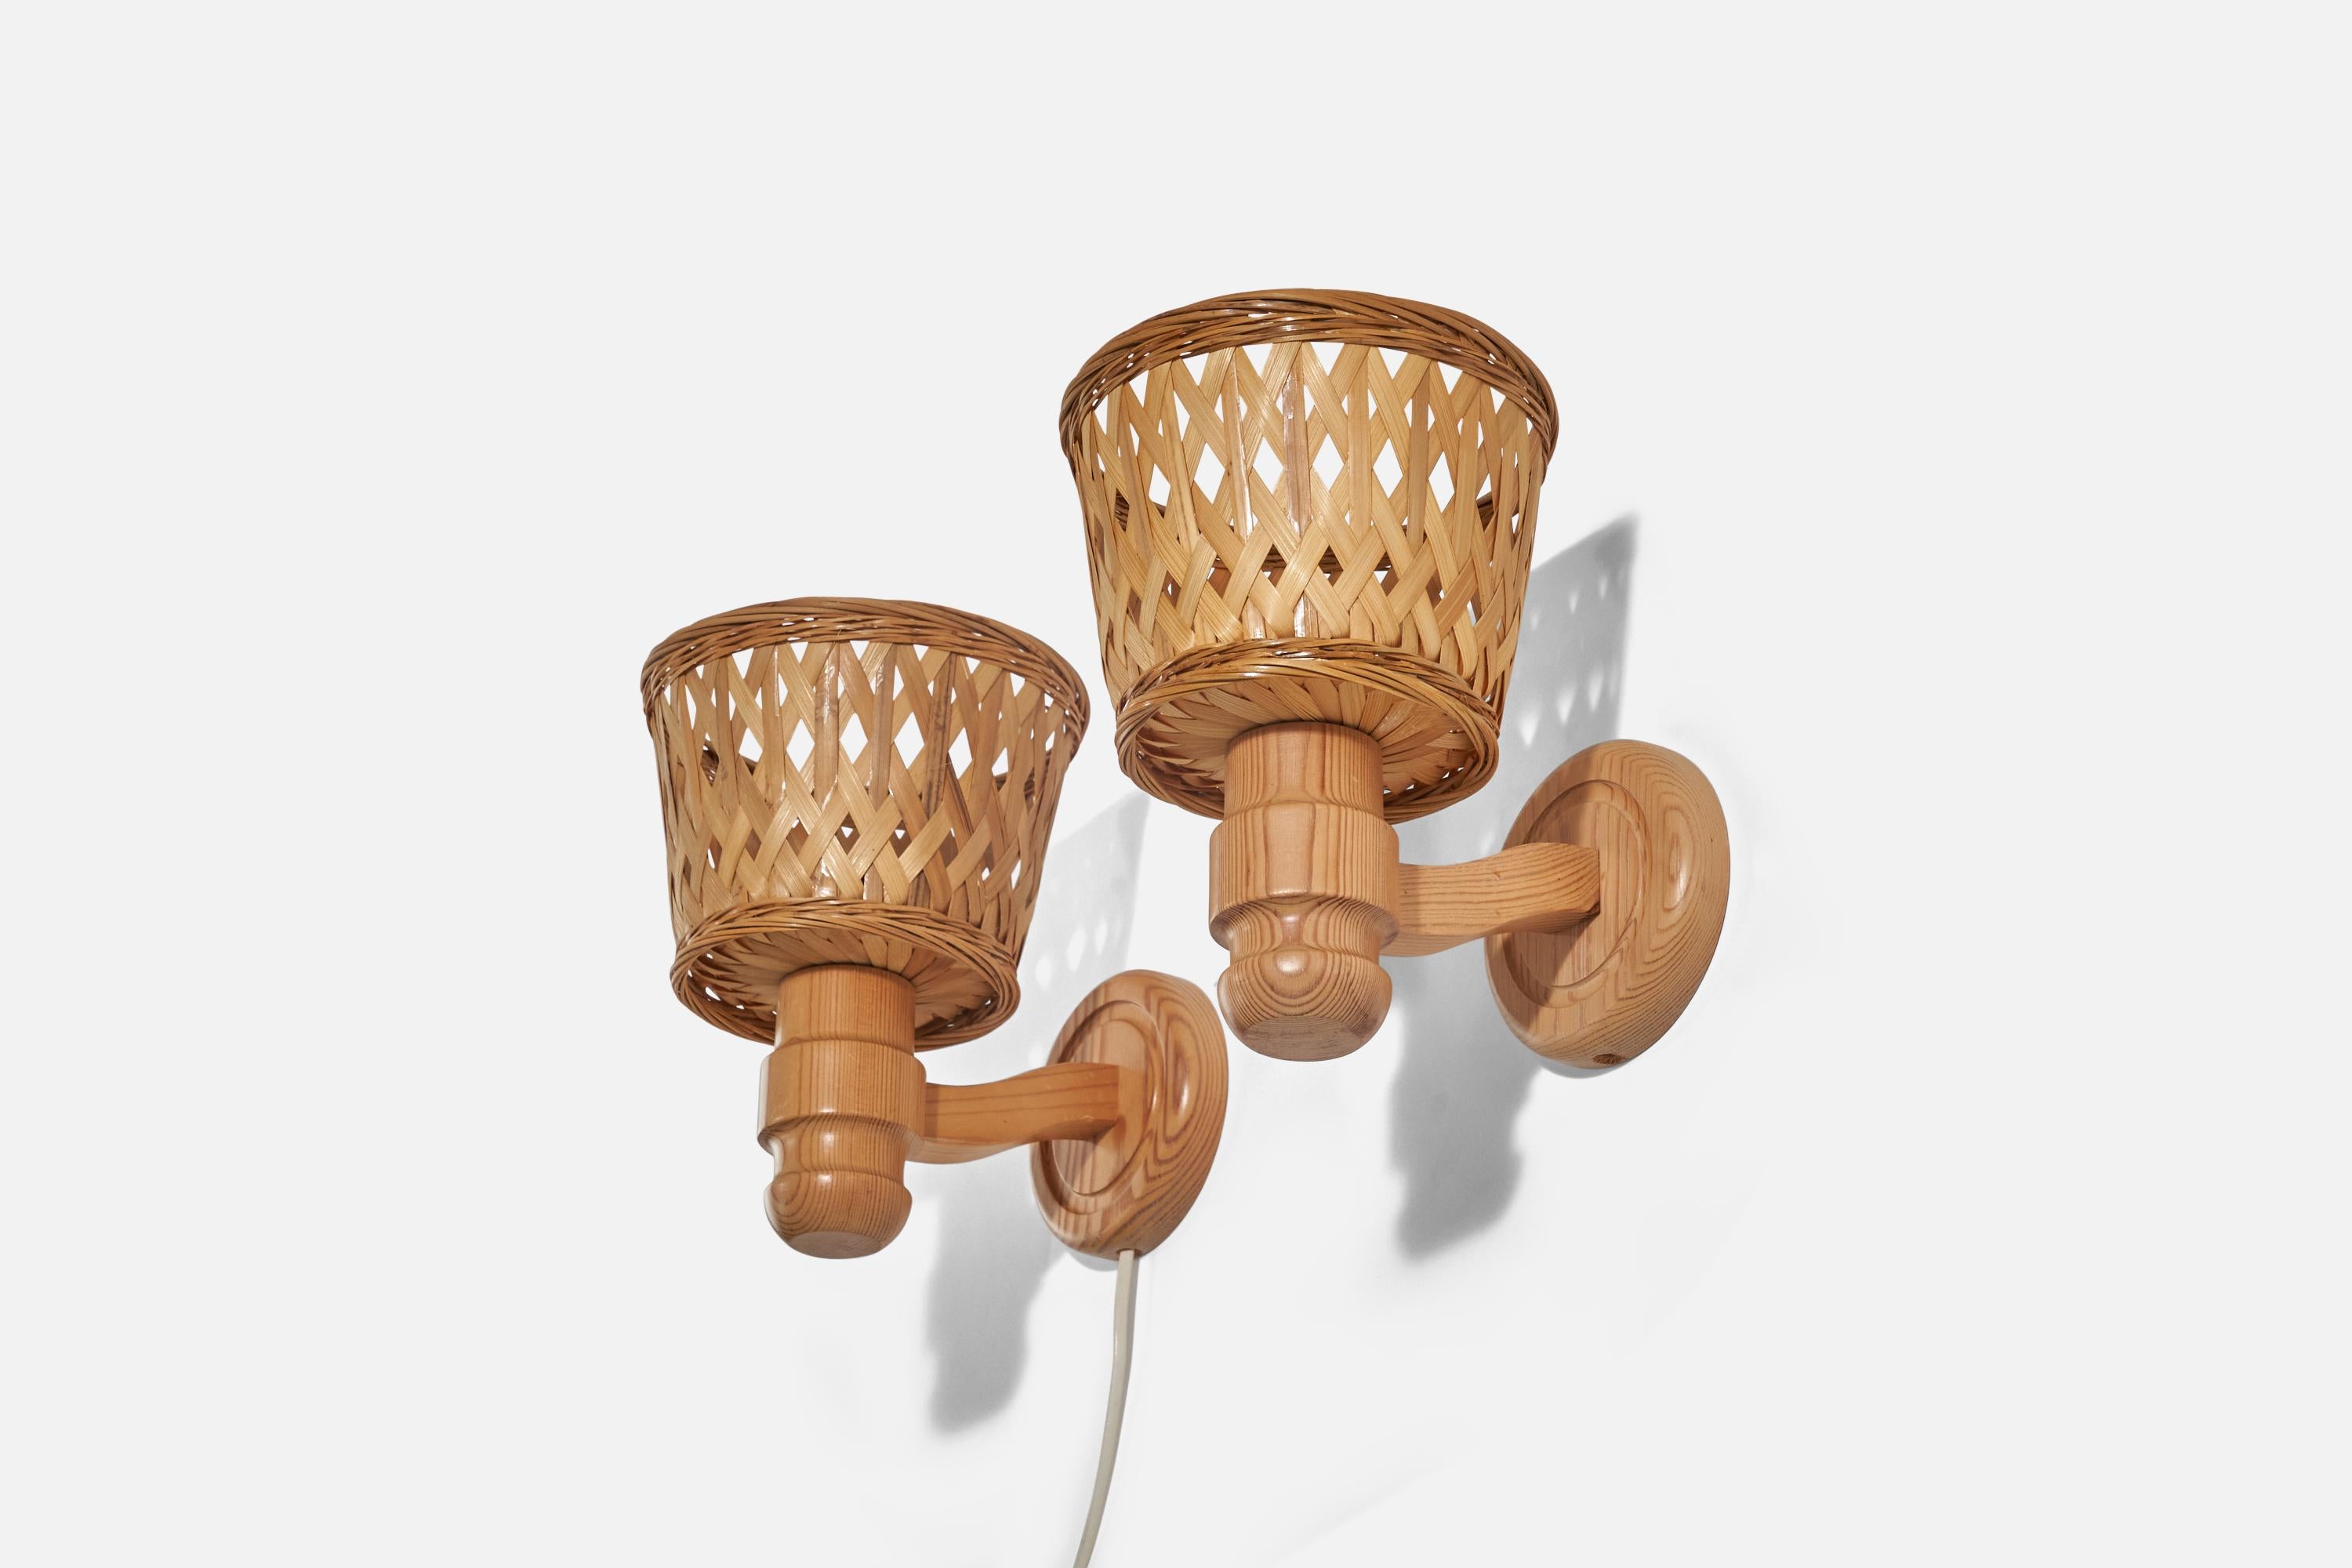 A pair of pine and rattan sconces/ wall lights designed and produced in Sweden, 1970s.

Sold with Lampshades. Dimensions stated are of sconces with lampshades. 

Dimensions of back plate (inches) : 4.56 x 4.56 x 0.81 (height x width x